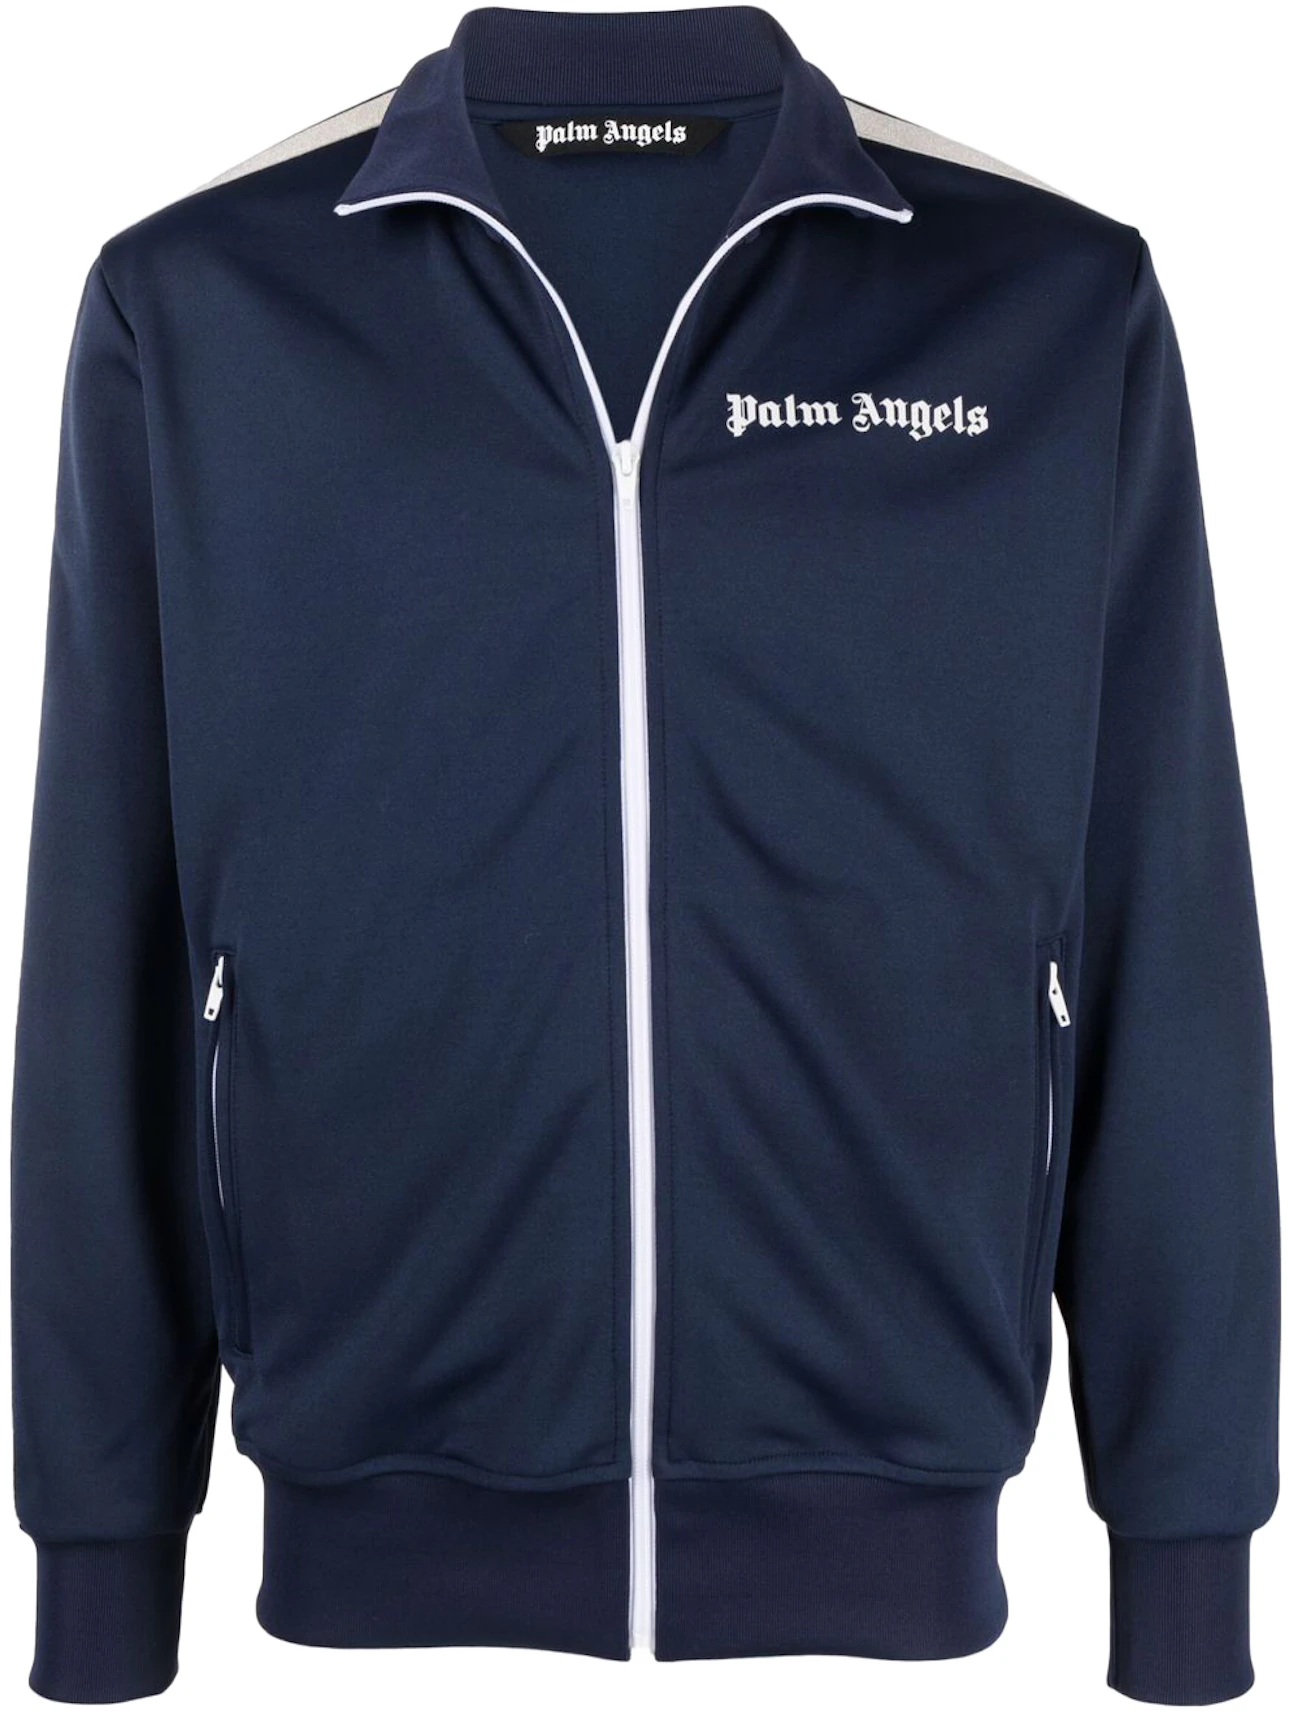 Palm Angels Striped Track Jacket Navy White - FW21 Men's - US